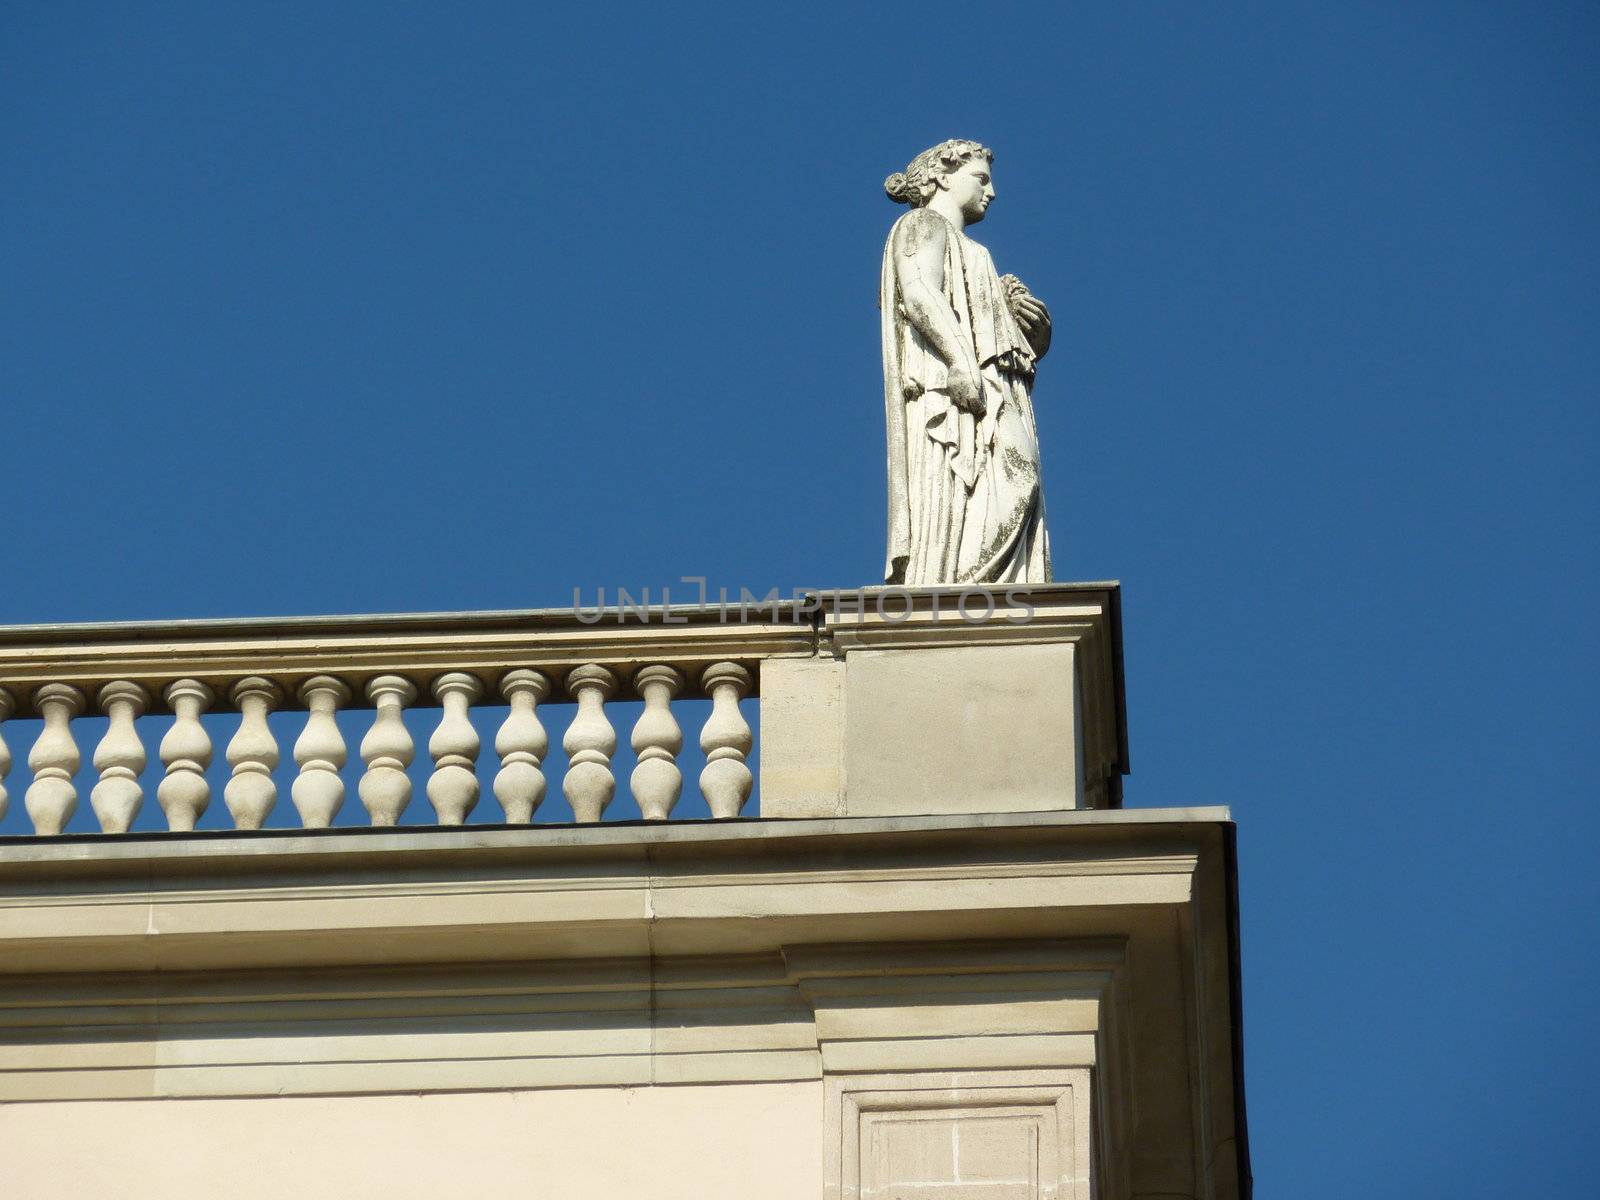 White statue of a woman on a balcony looking on the right